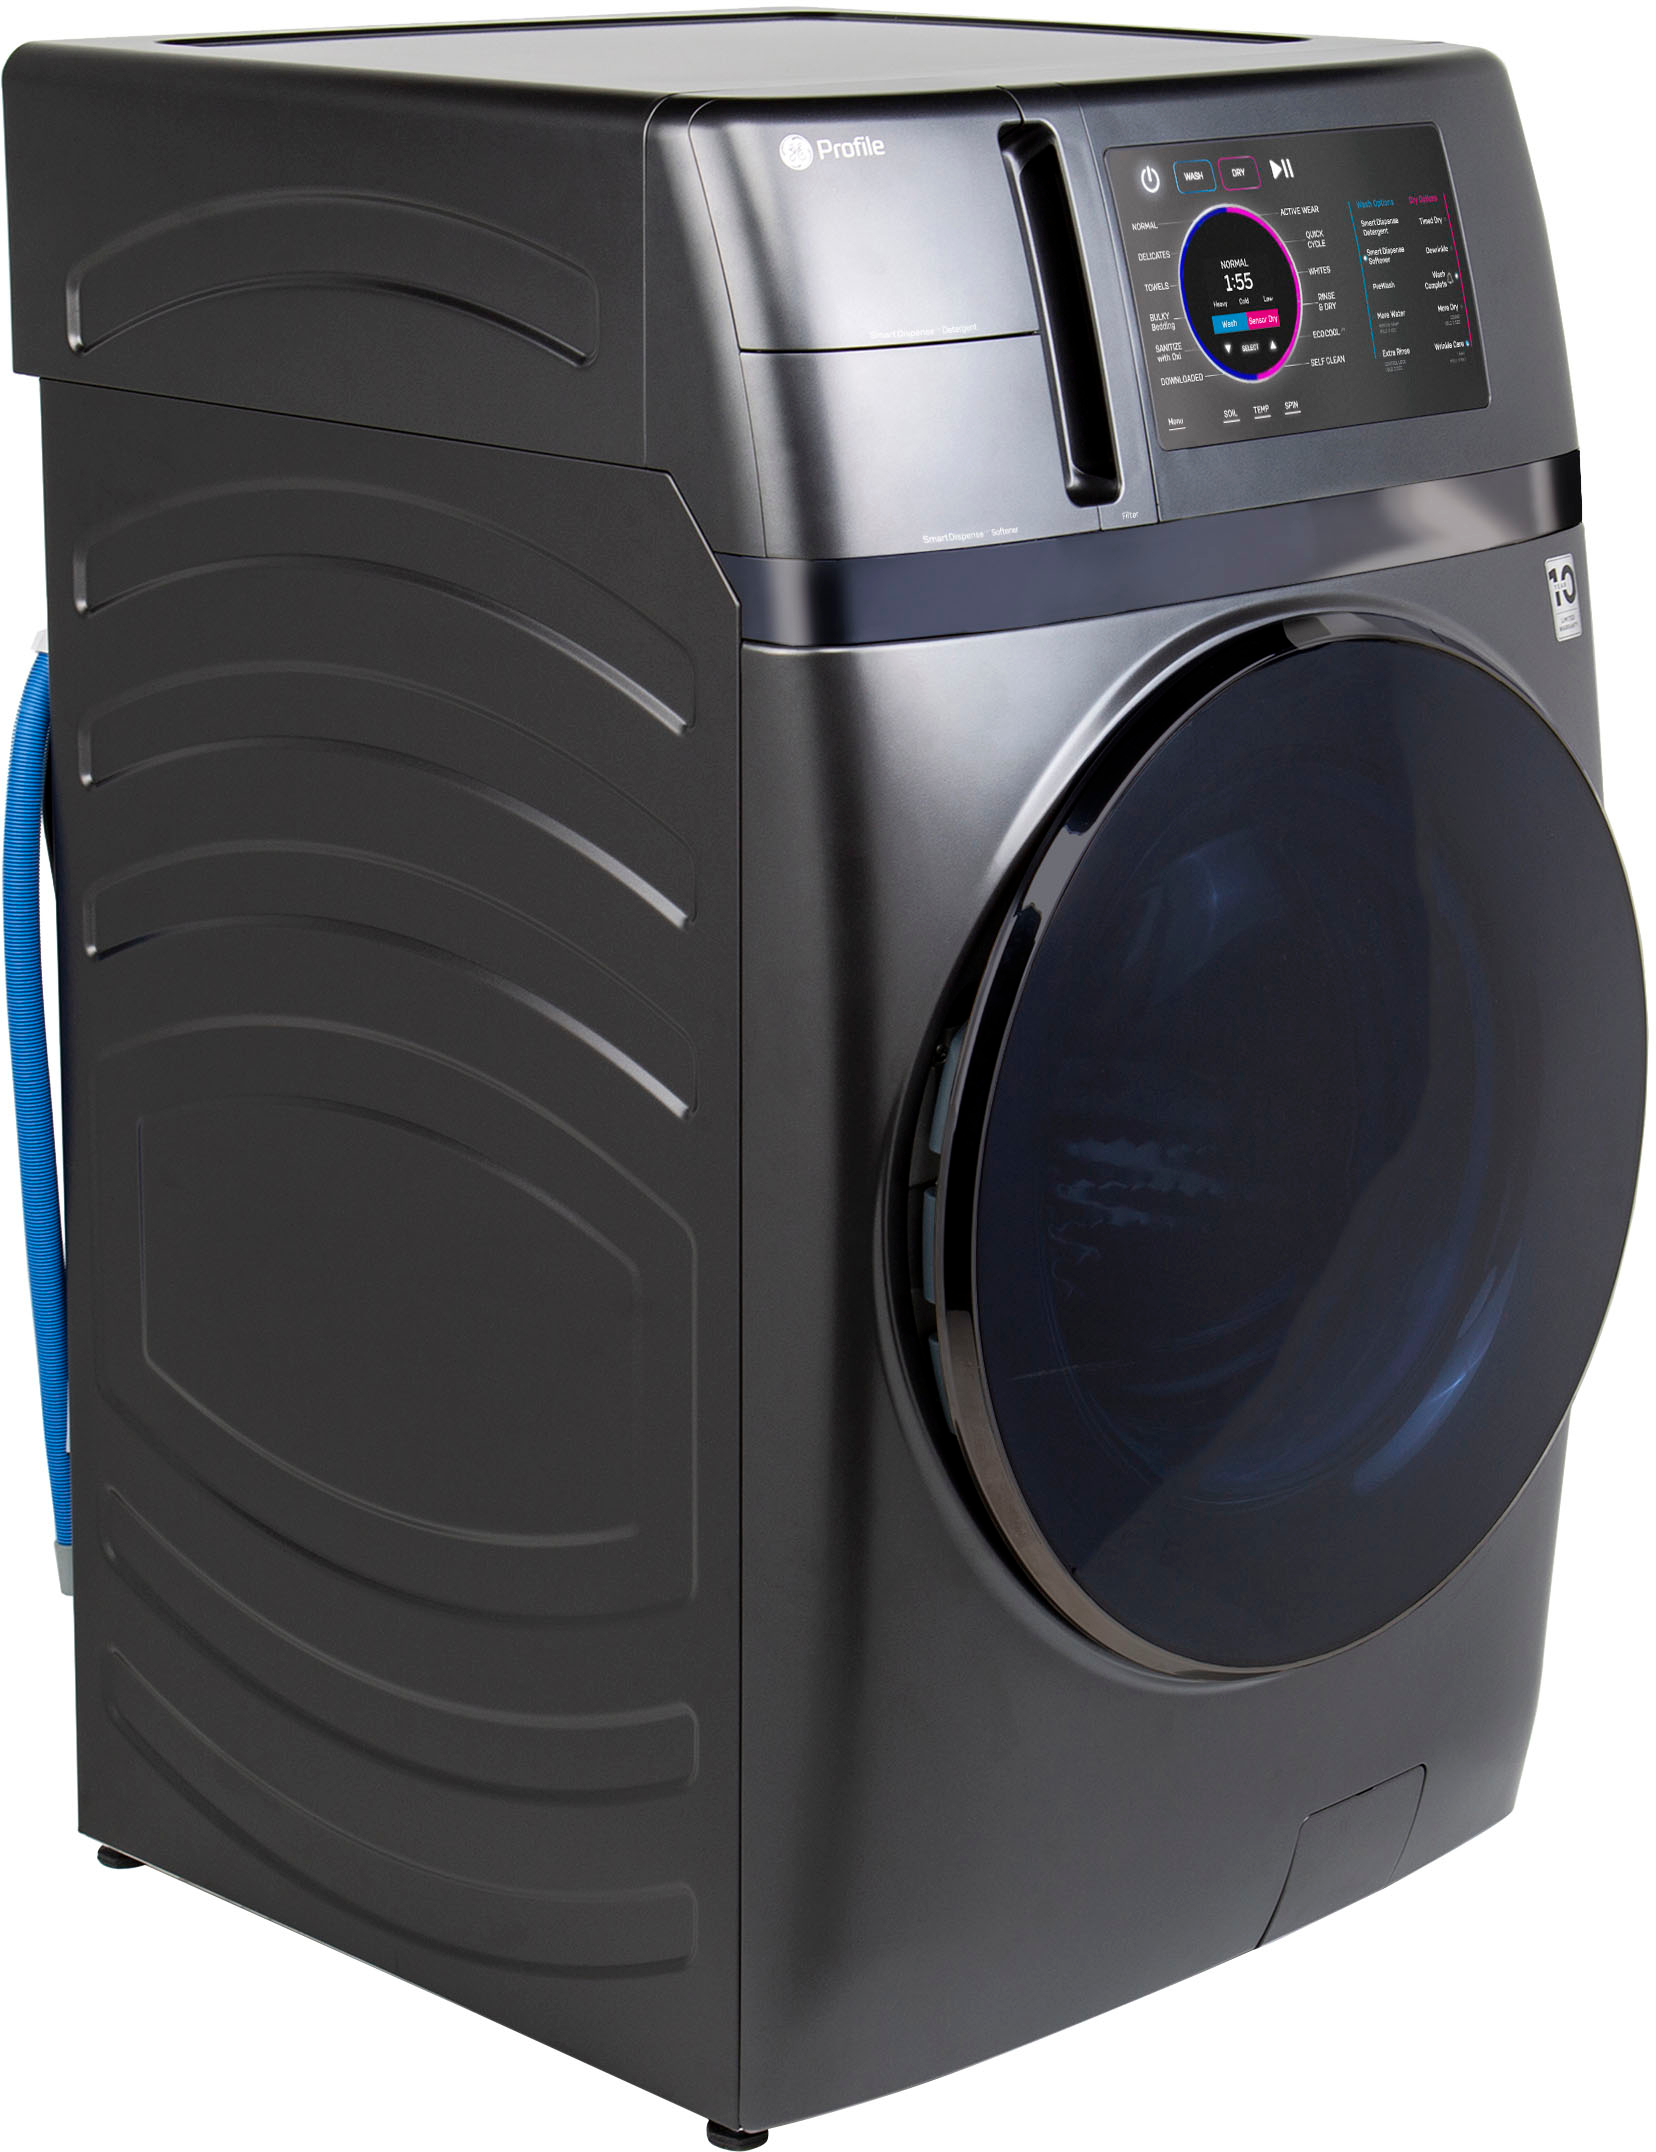 Angle View: GE Profile - 4.8 cu. ft. UltraFast Combo Washer & Electric Dryer with Ventless Heat Pump Technology - Carbon Graphite